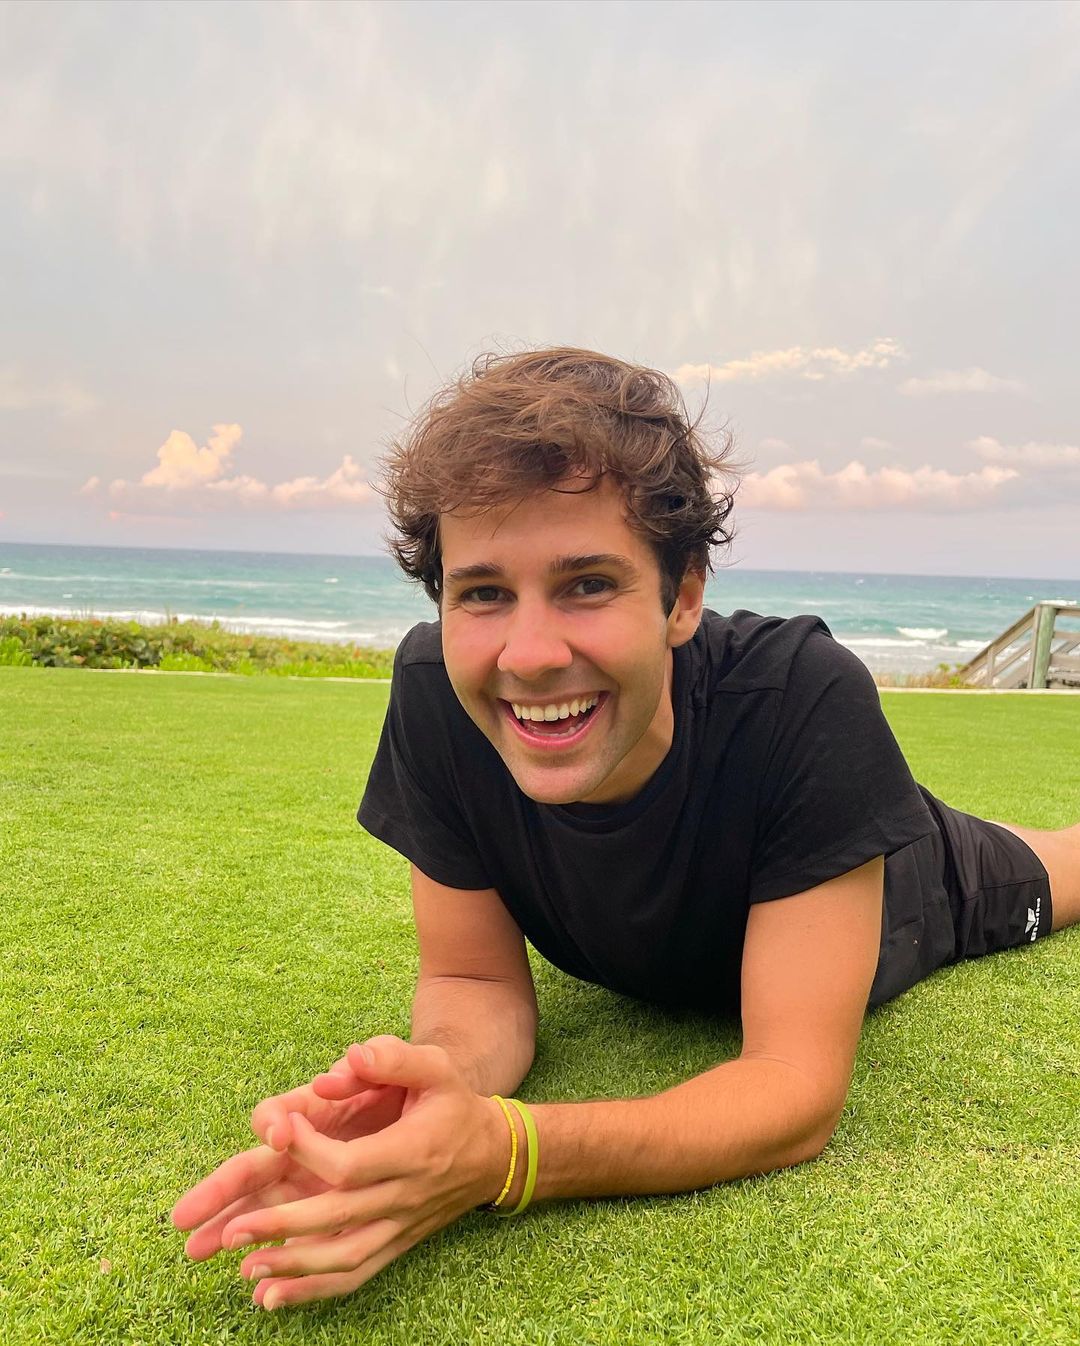 David Dobrik often shares his pictures on Instagram, as he did on June 16, 2021